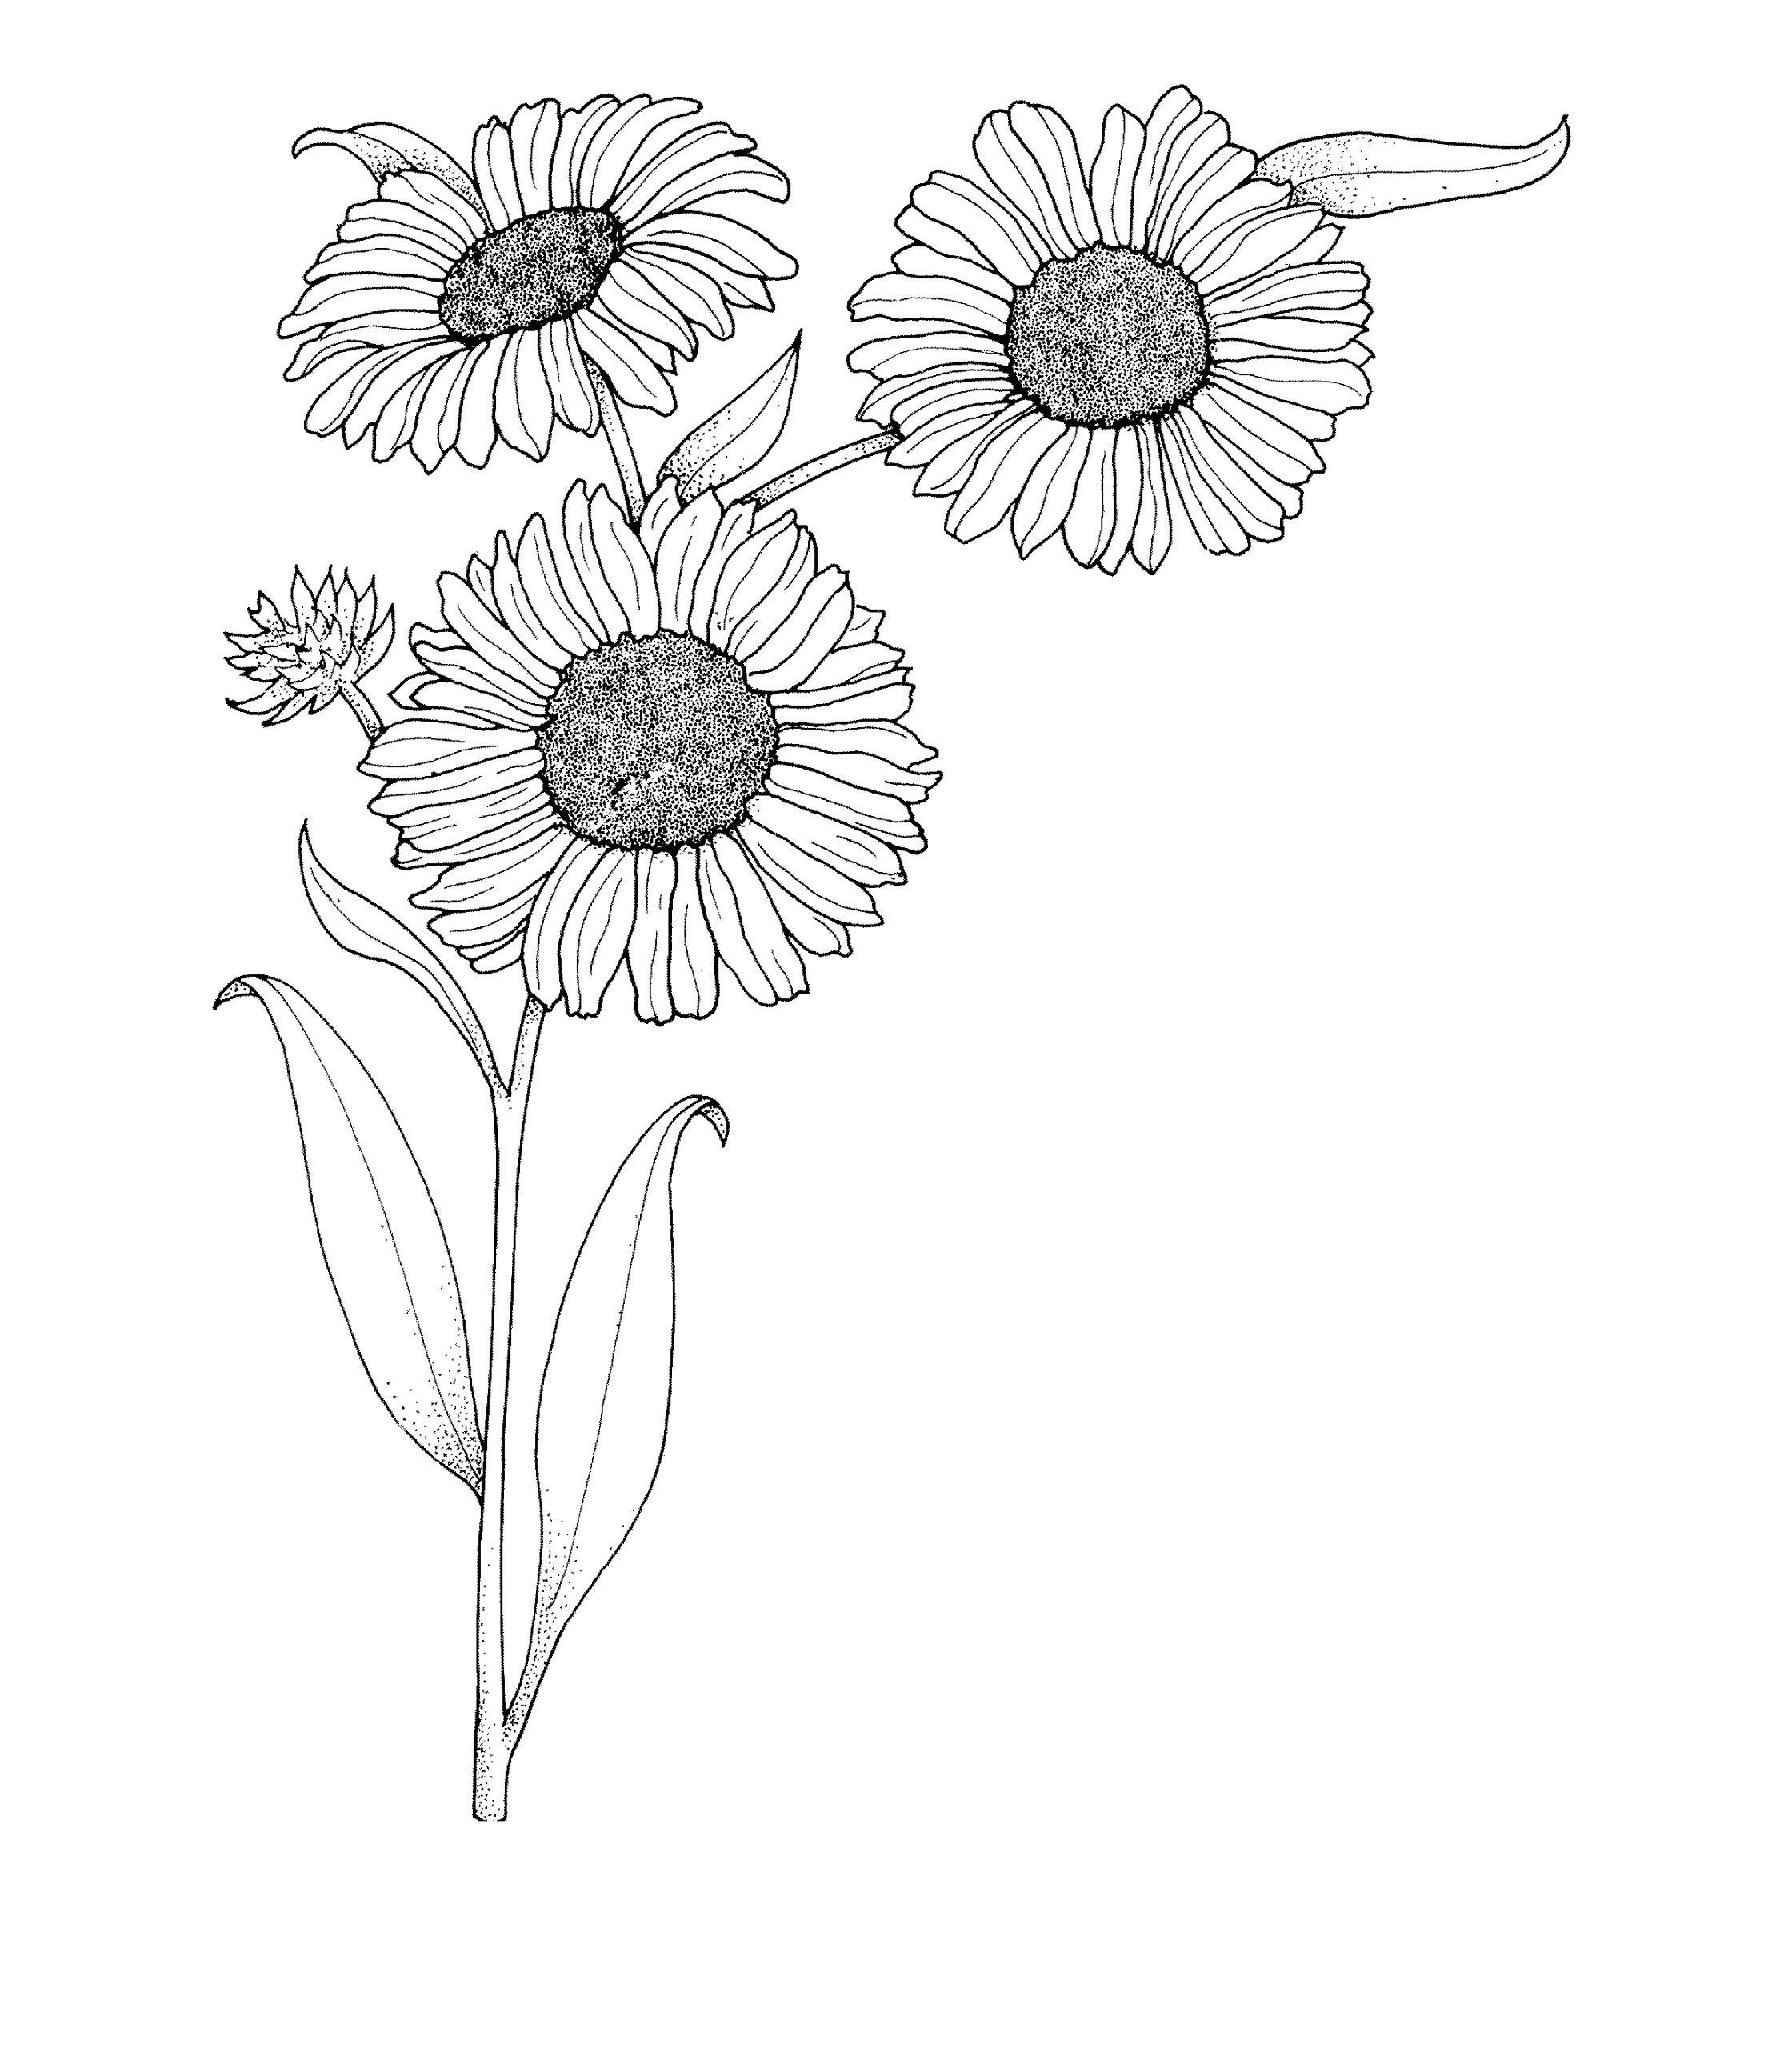 Realistic Sunflowers Coloring Page